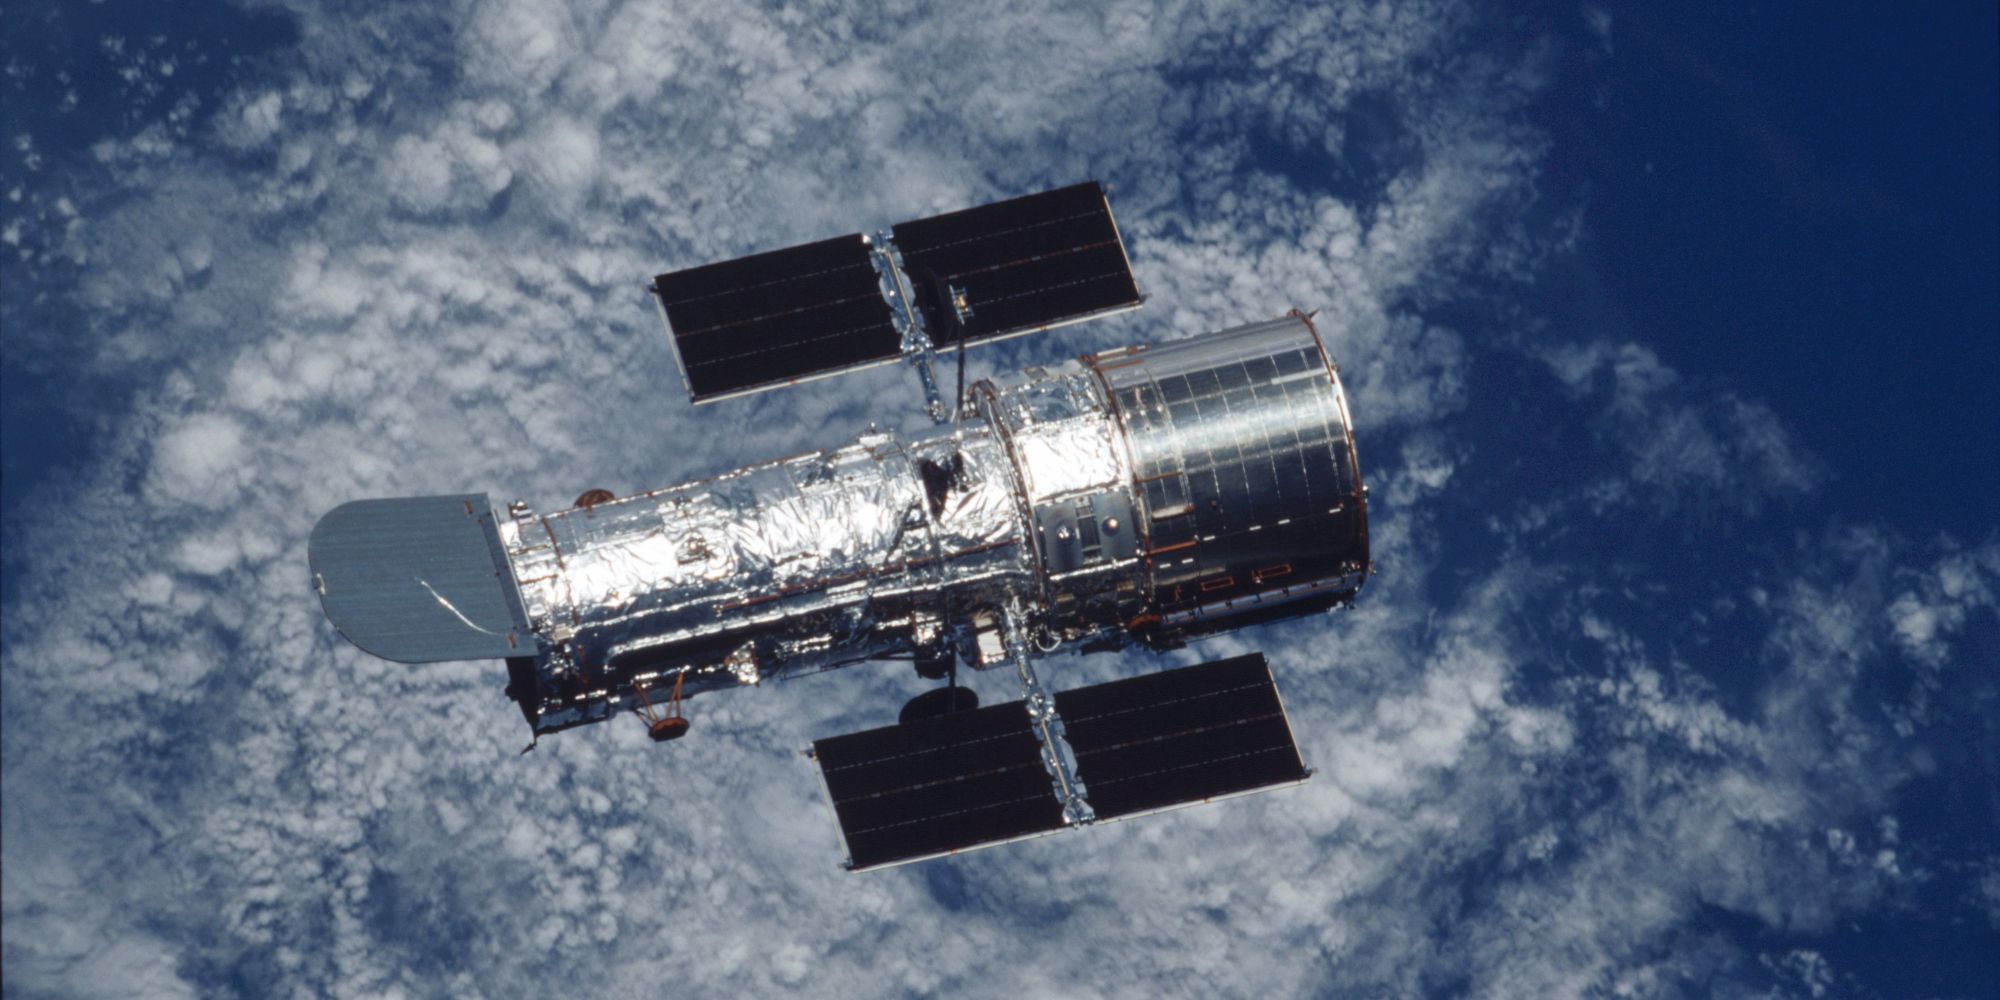 This Hubble Photo Is So Incredible You’ll Swear It’s Fake